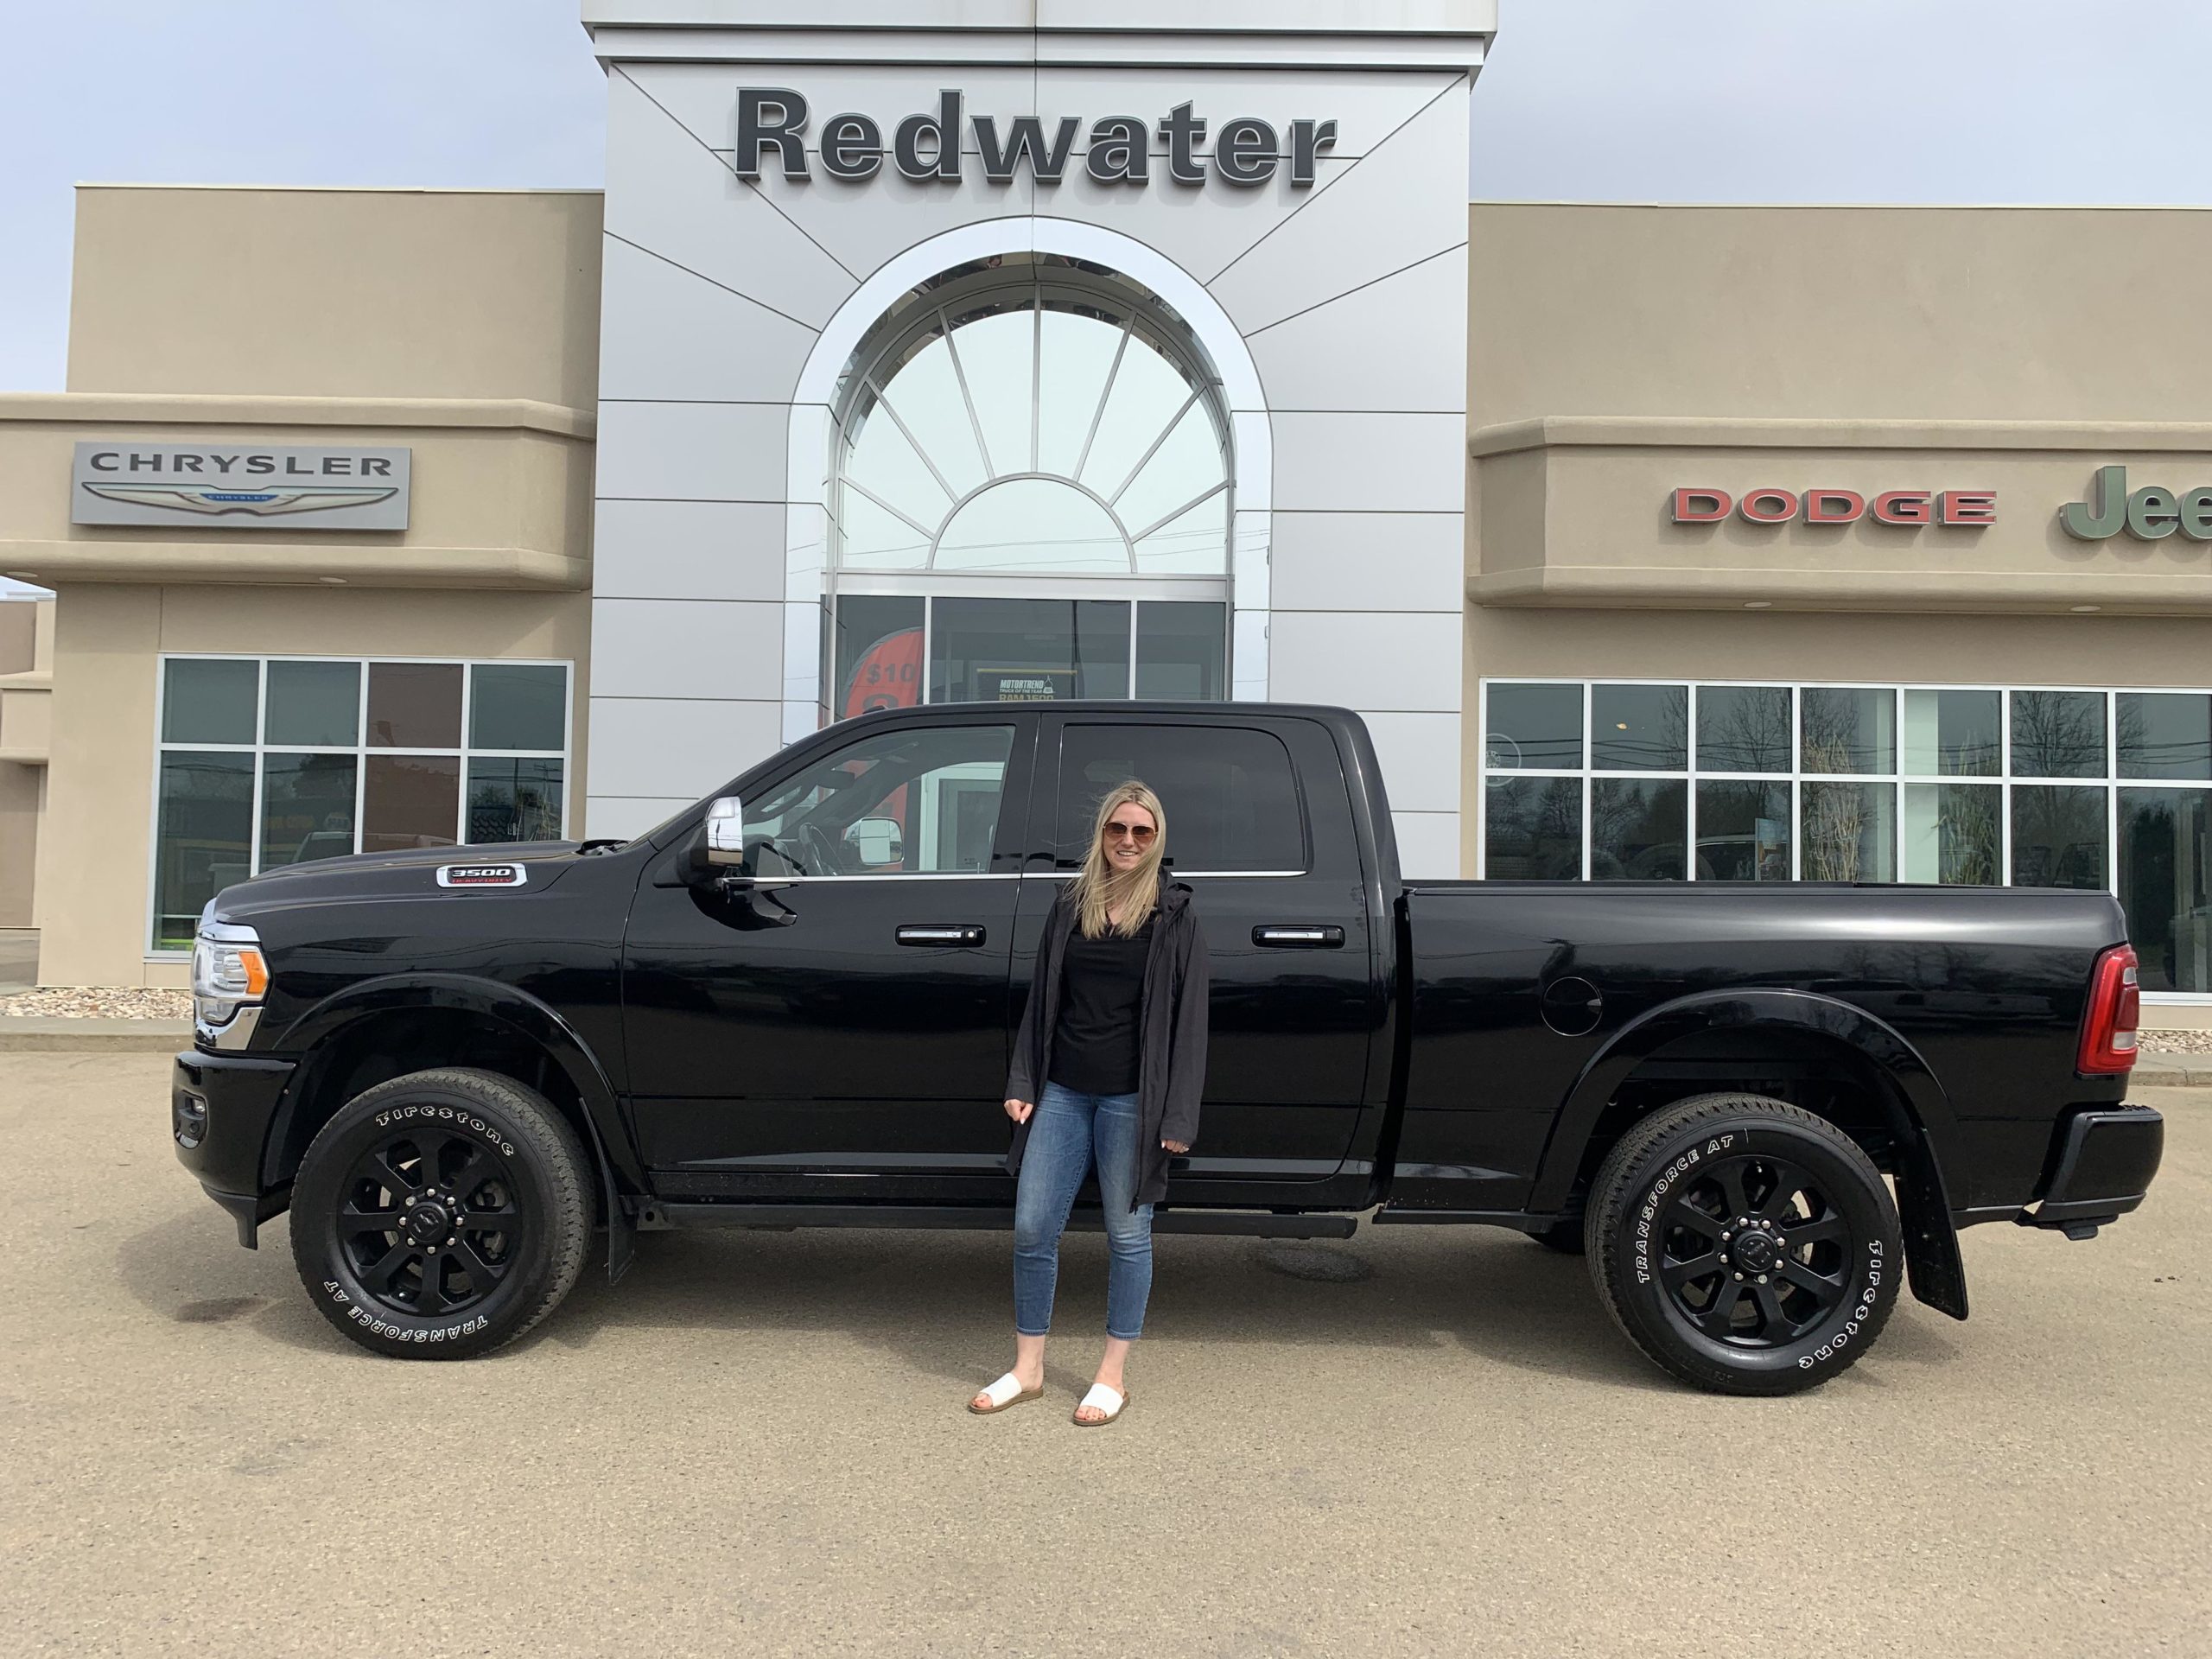 NR35516A Used 2019 Ram 3500 Limited Crew Cab 4x4 Redwater Dodge